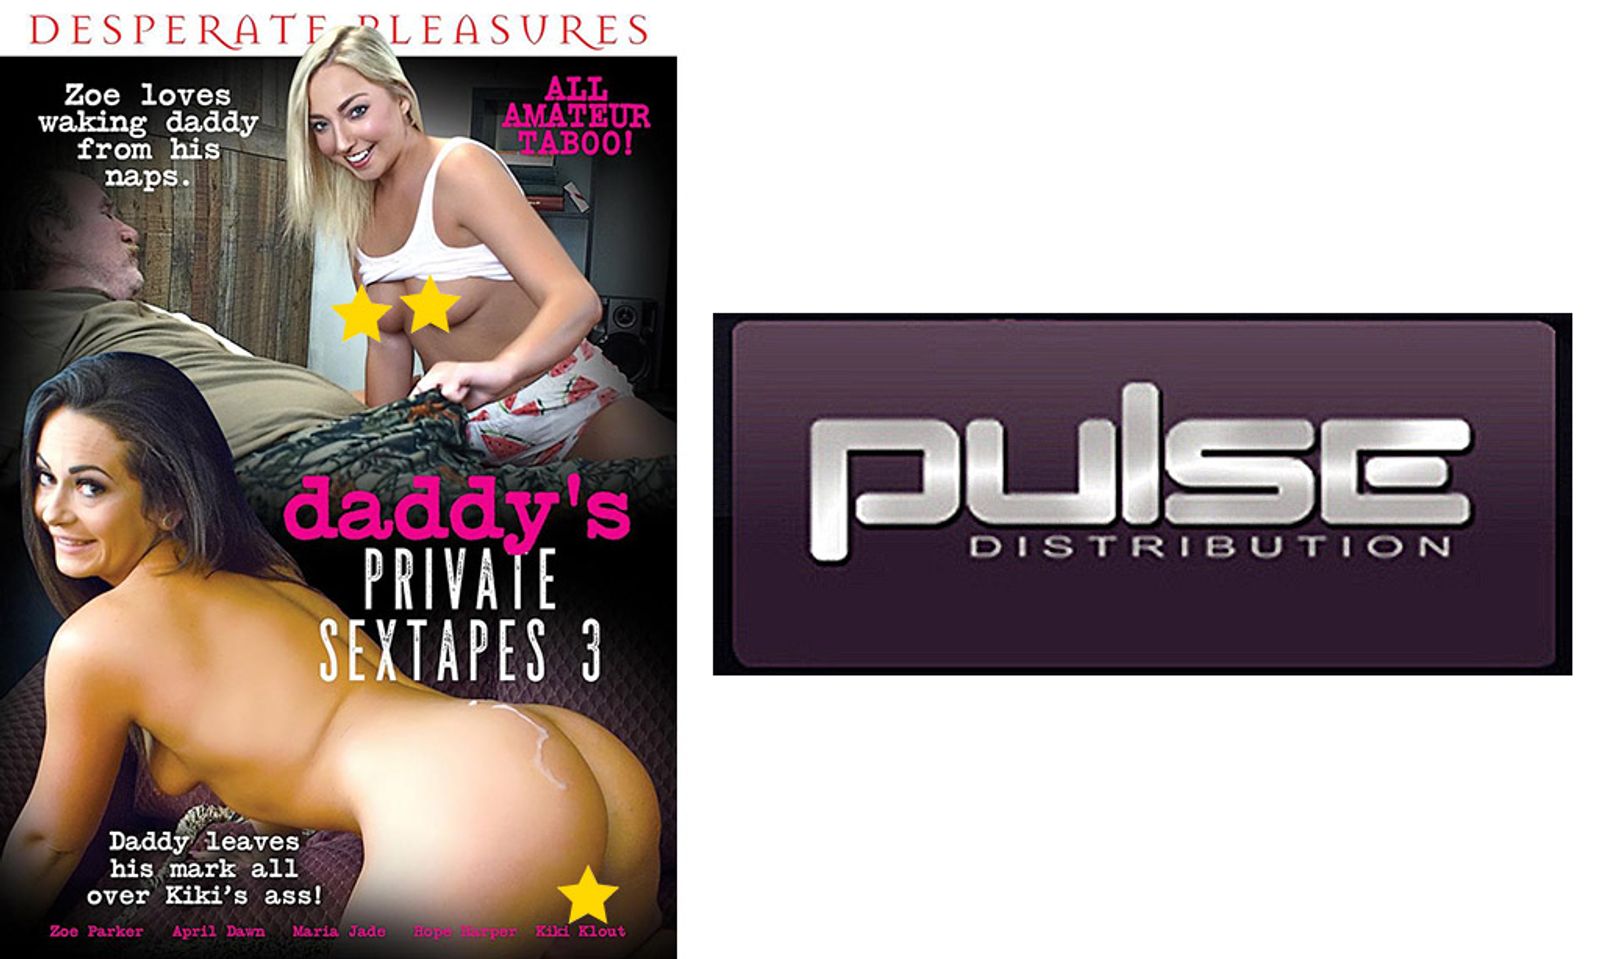 Desperate Pleasures Streets ‘Daddy’s Private Sextapes 3’